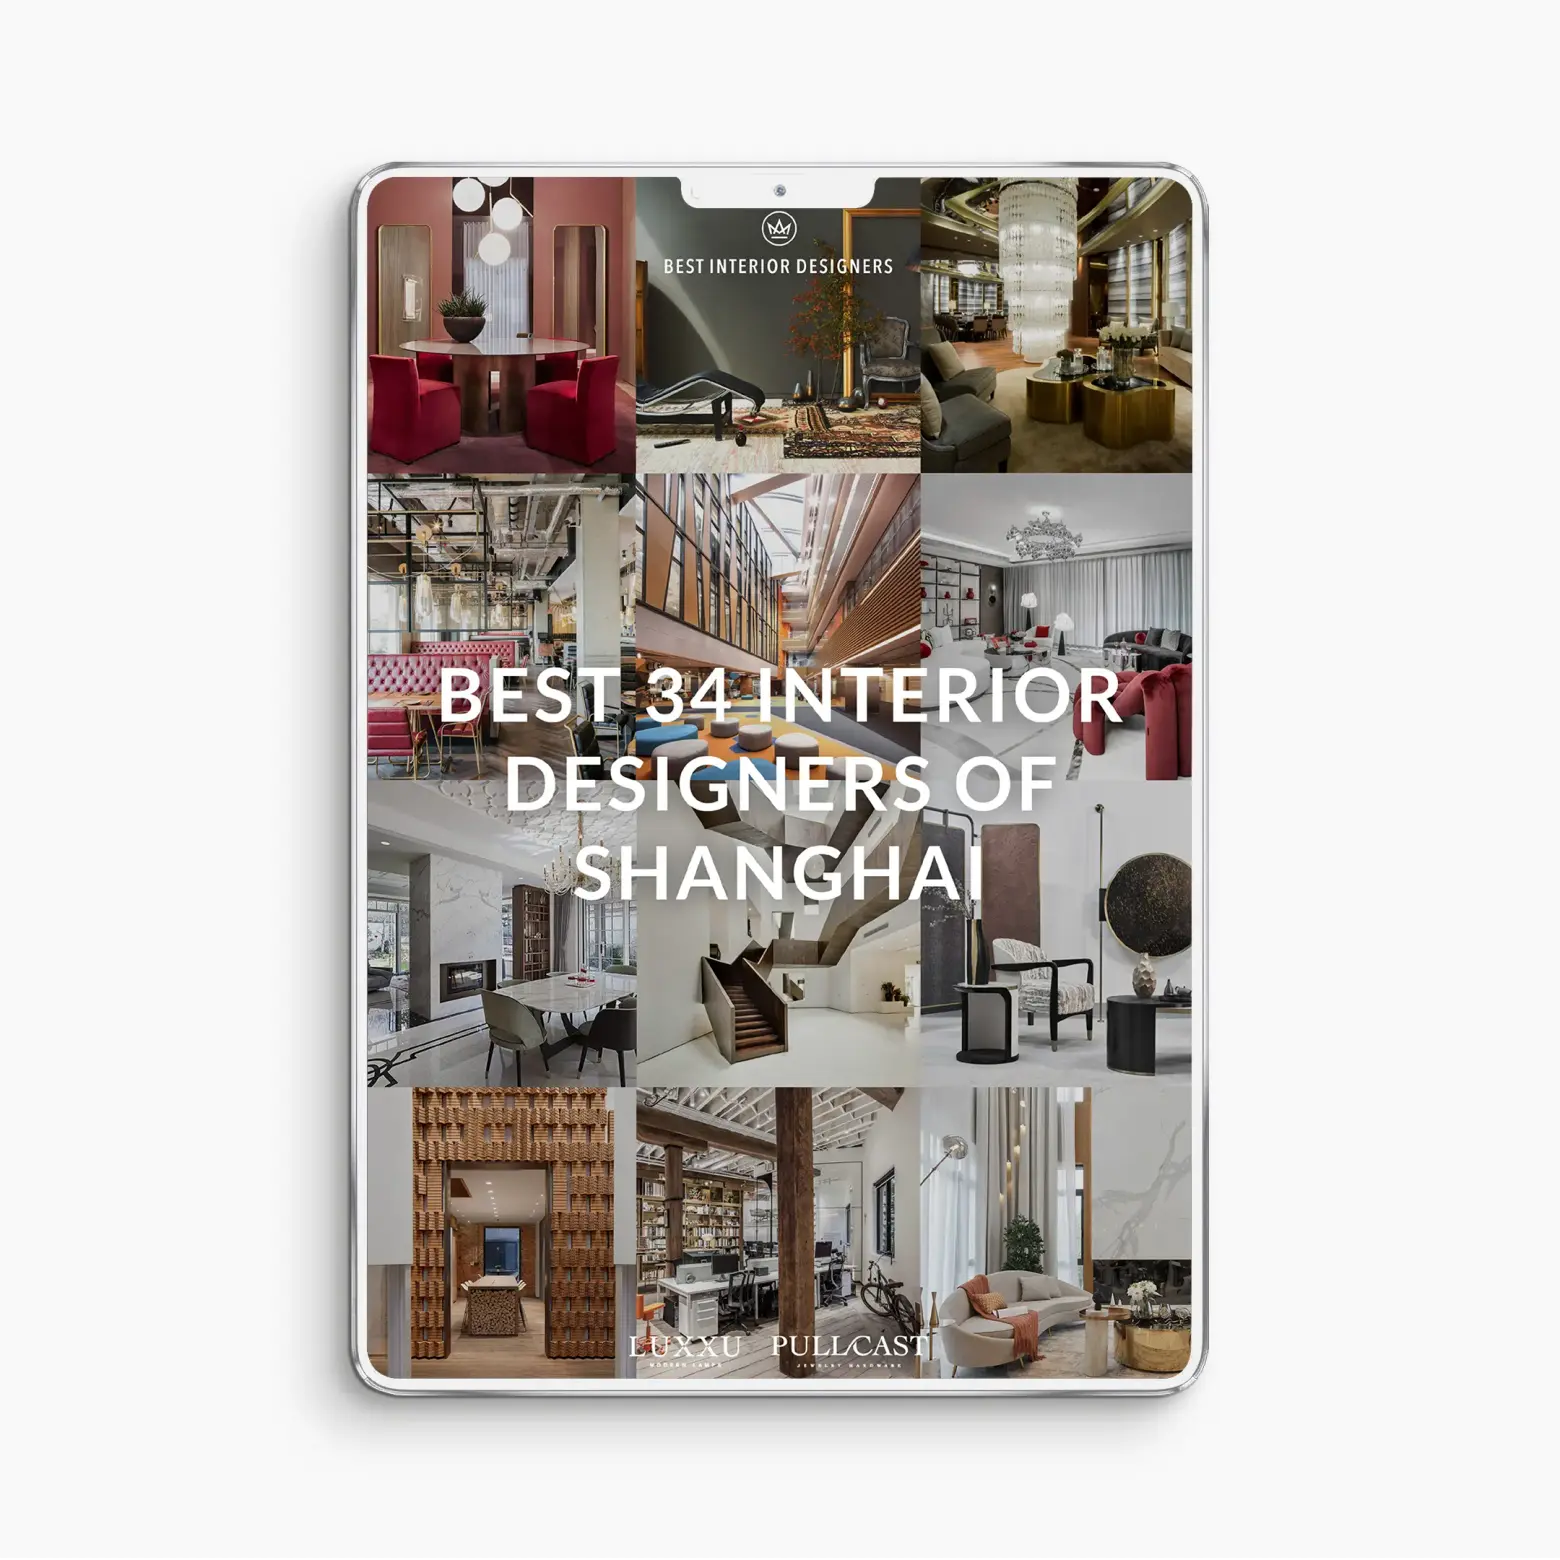 Free Ebooks Download: The Best Interior Designers with PullCast